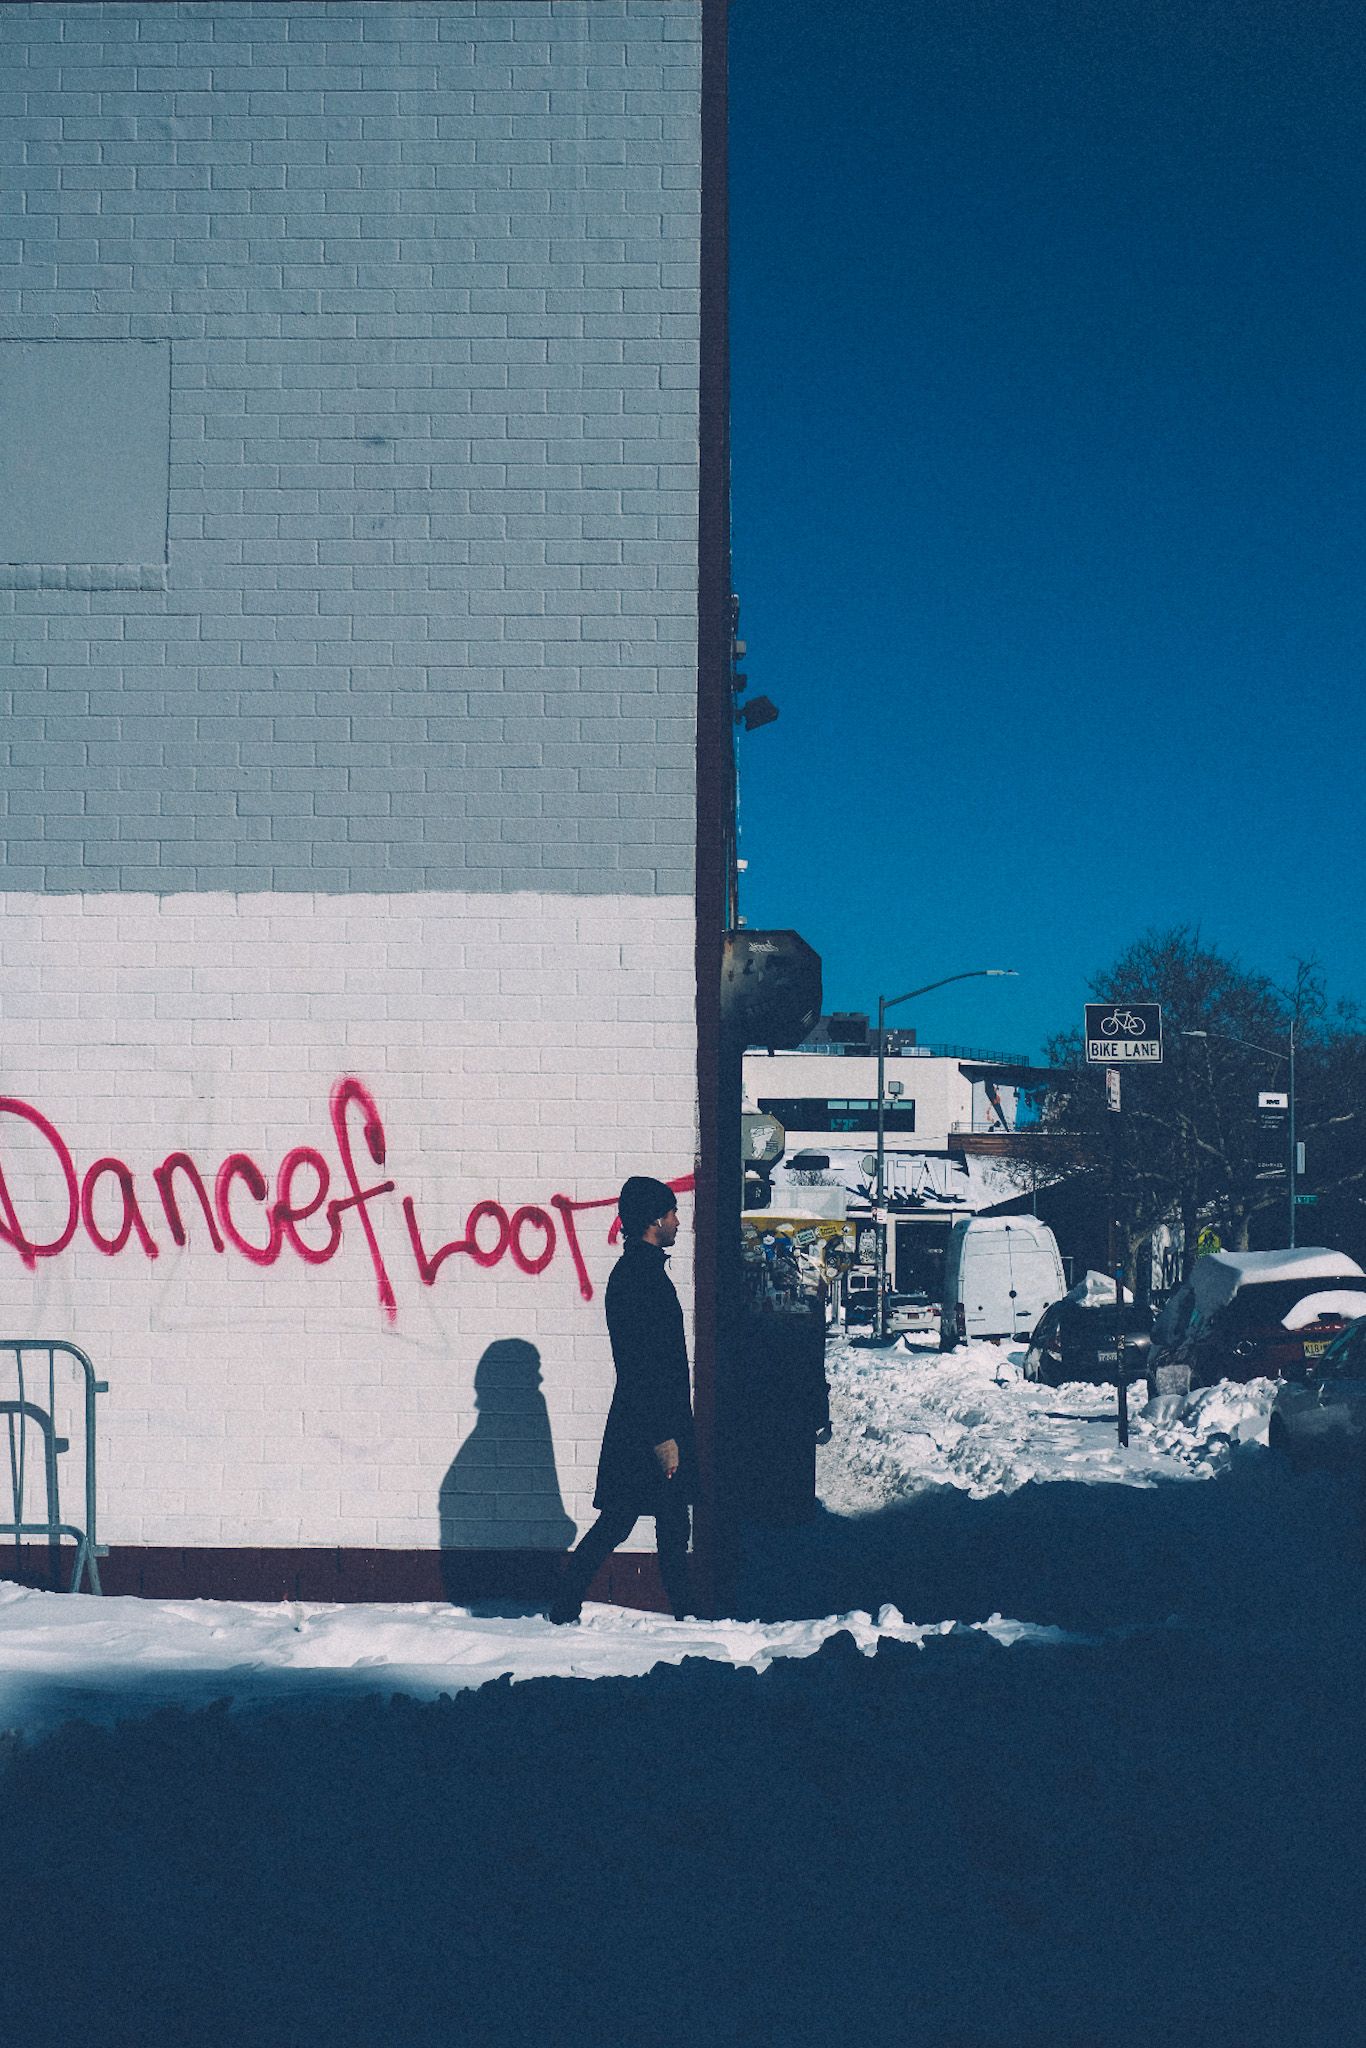 On a sunny day, piles of snow line the sidewalk where a person is passing in front of a building. The building, normally gray and white painted brick, displays the word “Dancefloor” in pink graffiti.